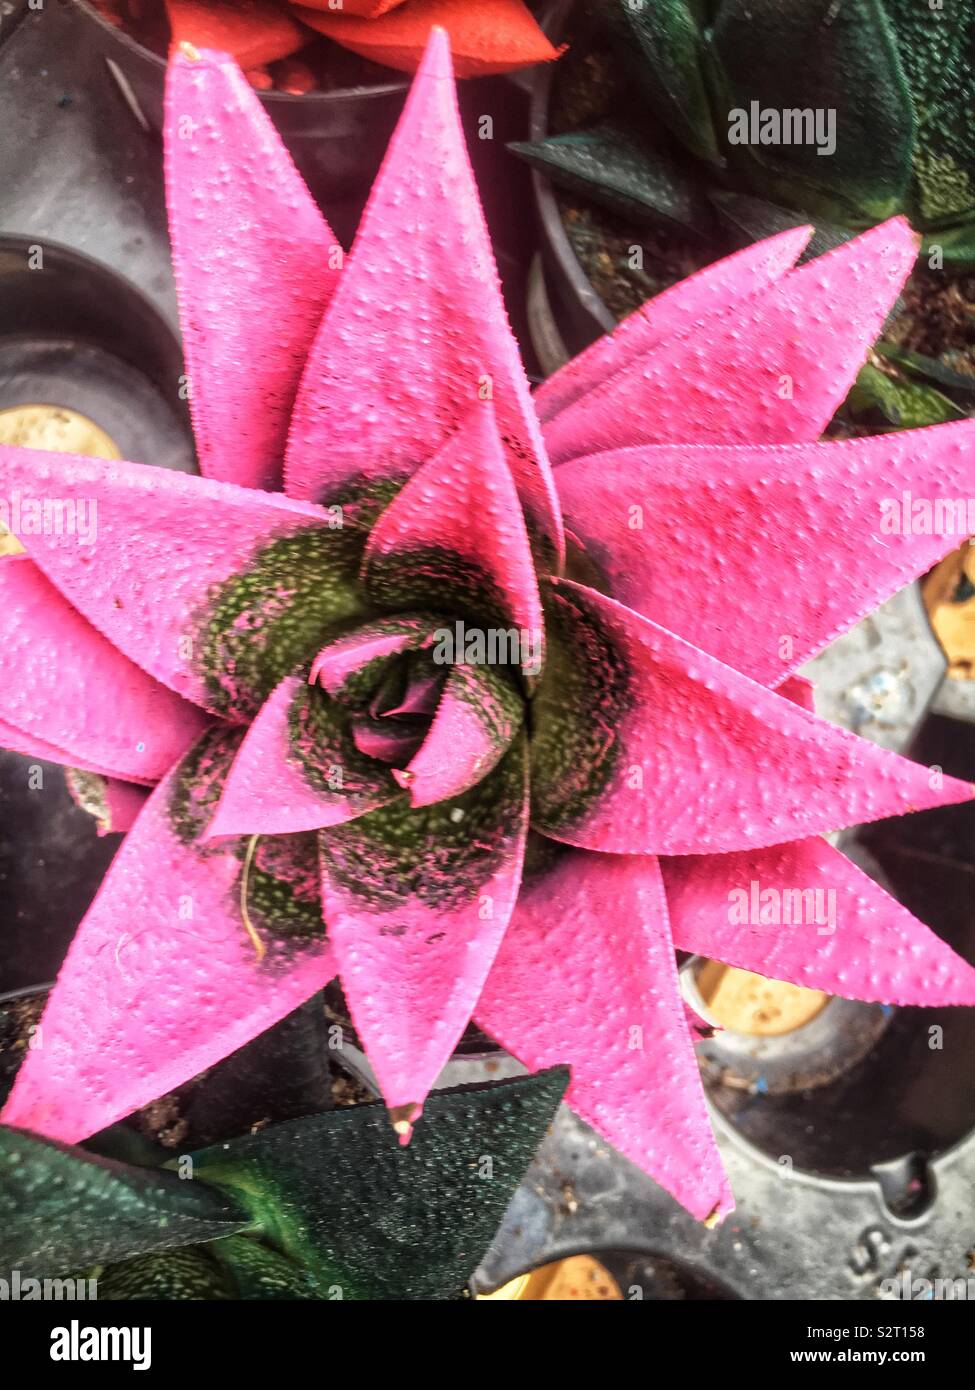 Potted succulent plant painted a bright pink. Stock Photo